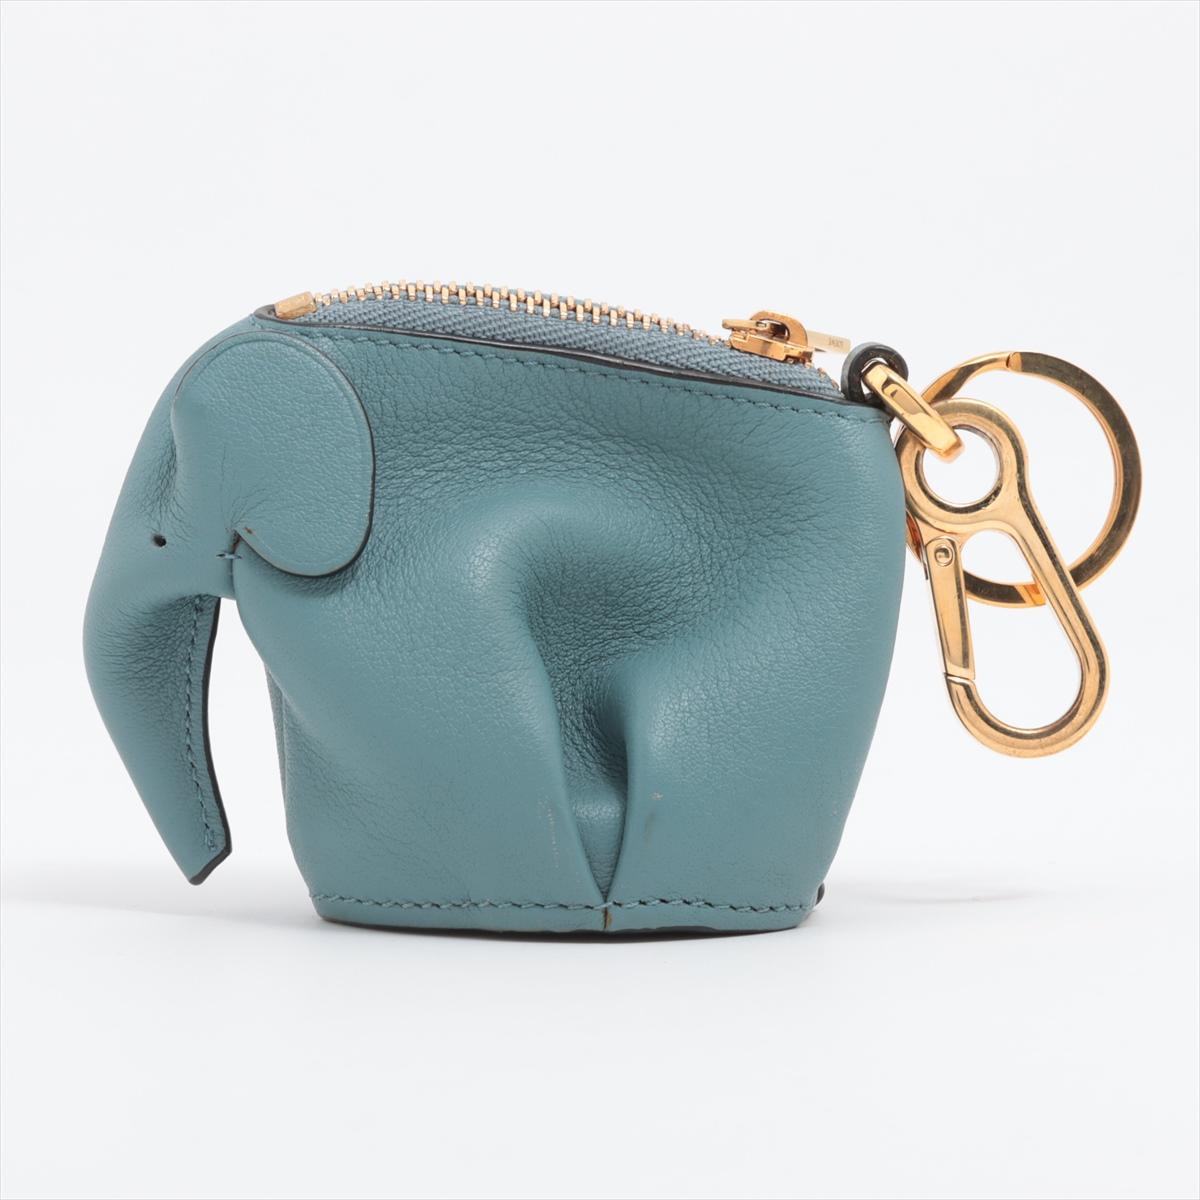 The Loewe Elephant Leather Coin Purse Bag Charm in Blue is a whimsical and charming accessory that showcases Loewe's playful design aesthetic. Crafted from high-quality leather, the coin purse takes the shape of an adorable elephant, reflecting the